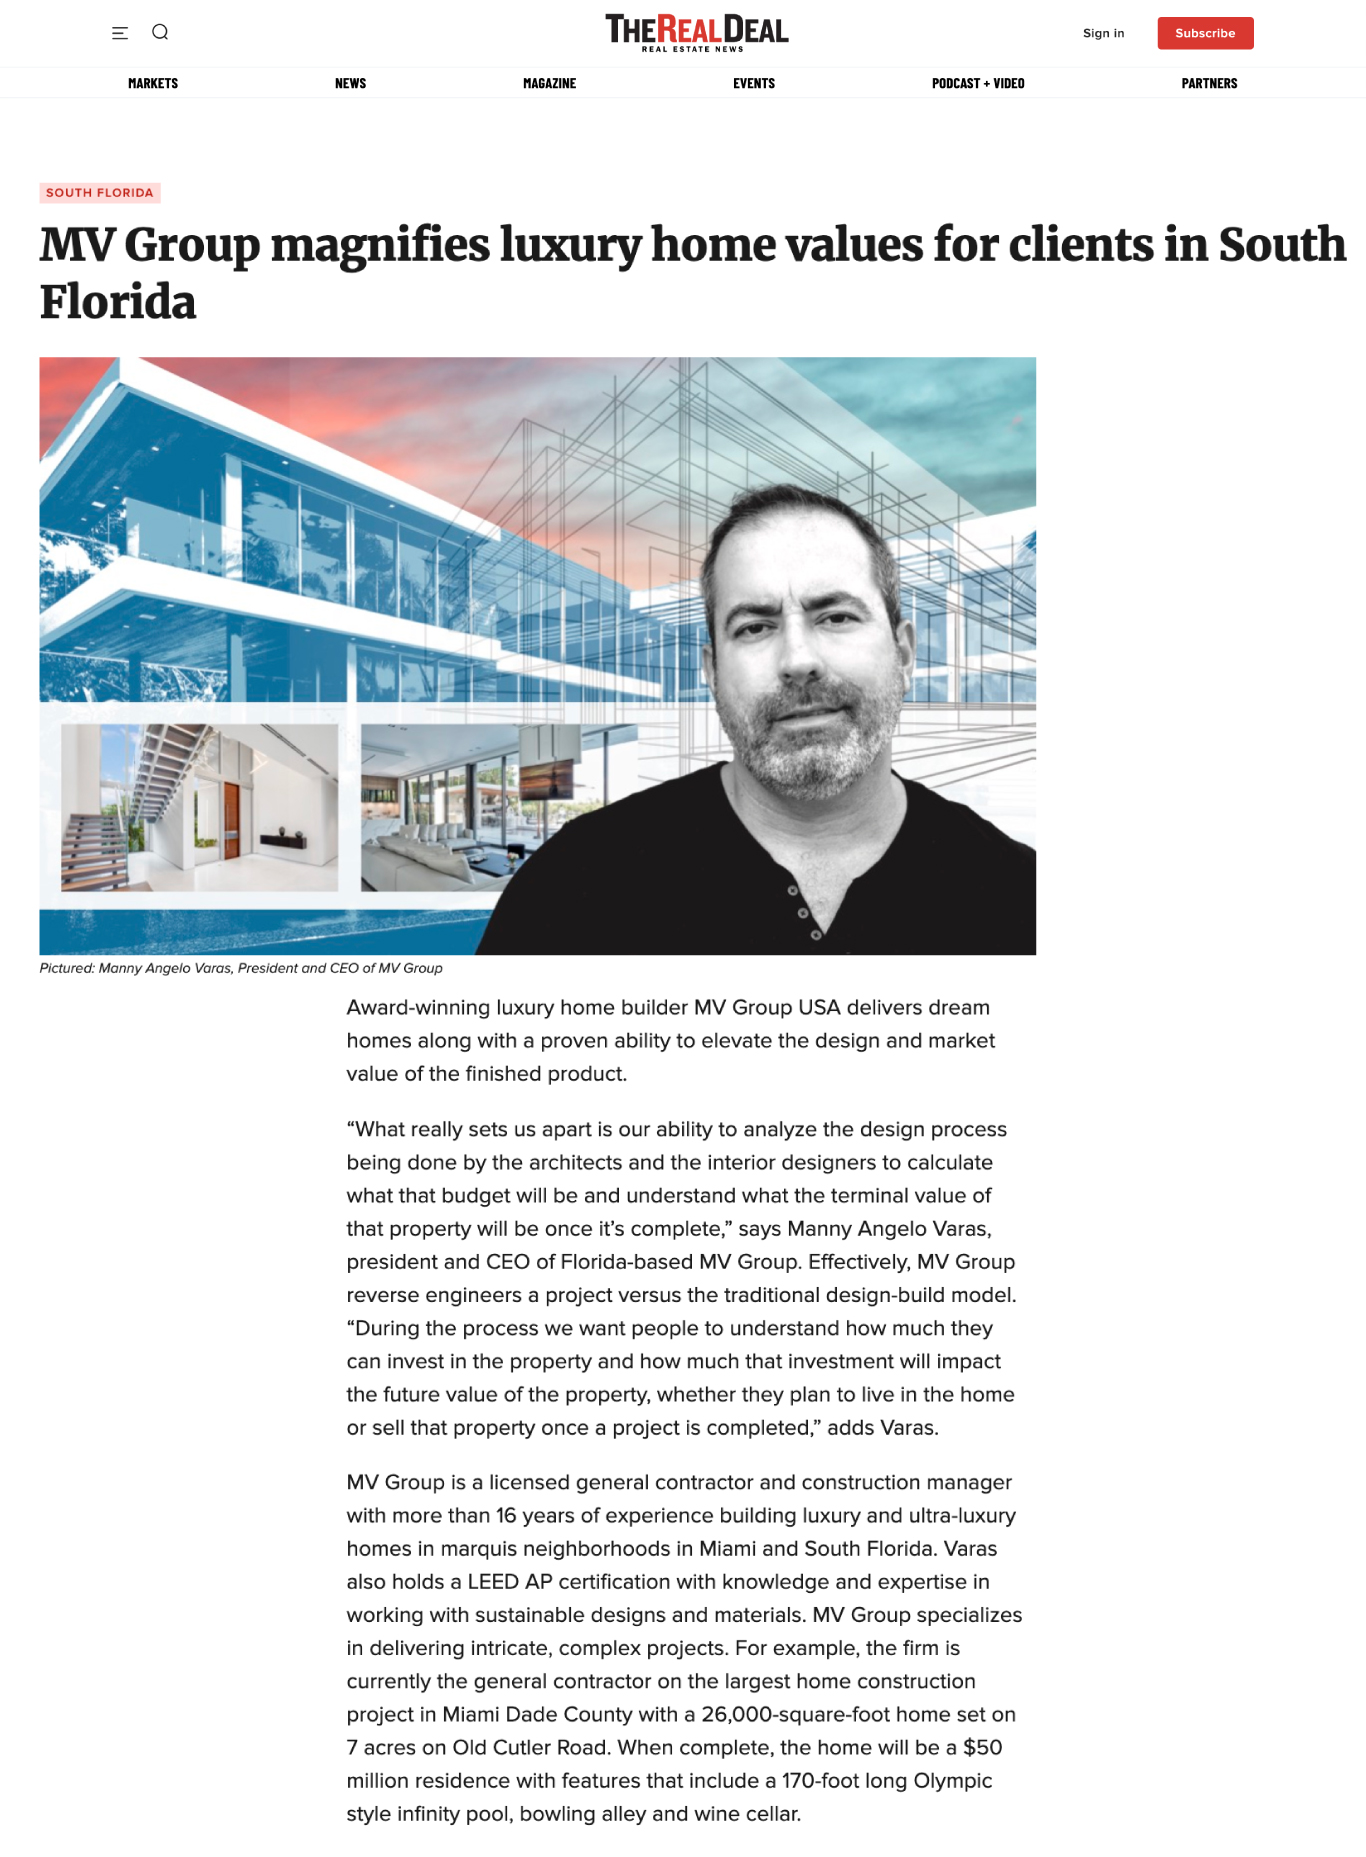 MV Group magnifies luxury home values for clients in South Florida